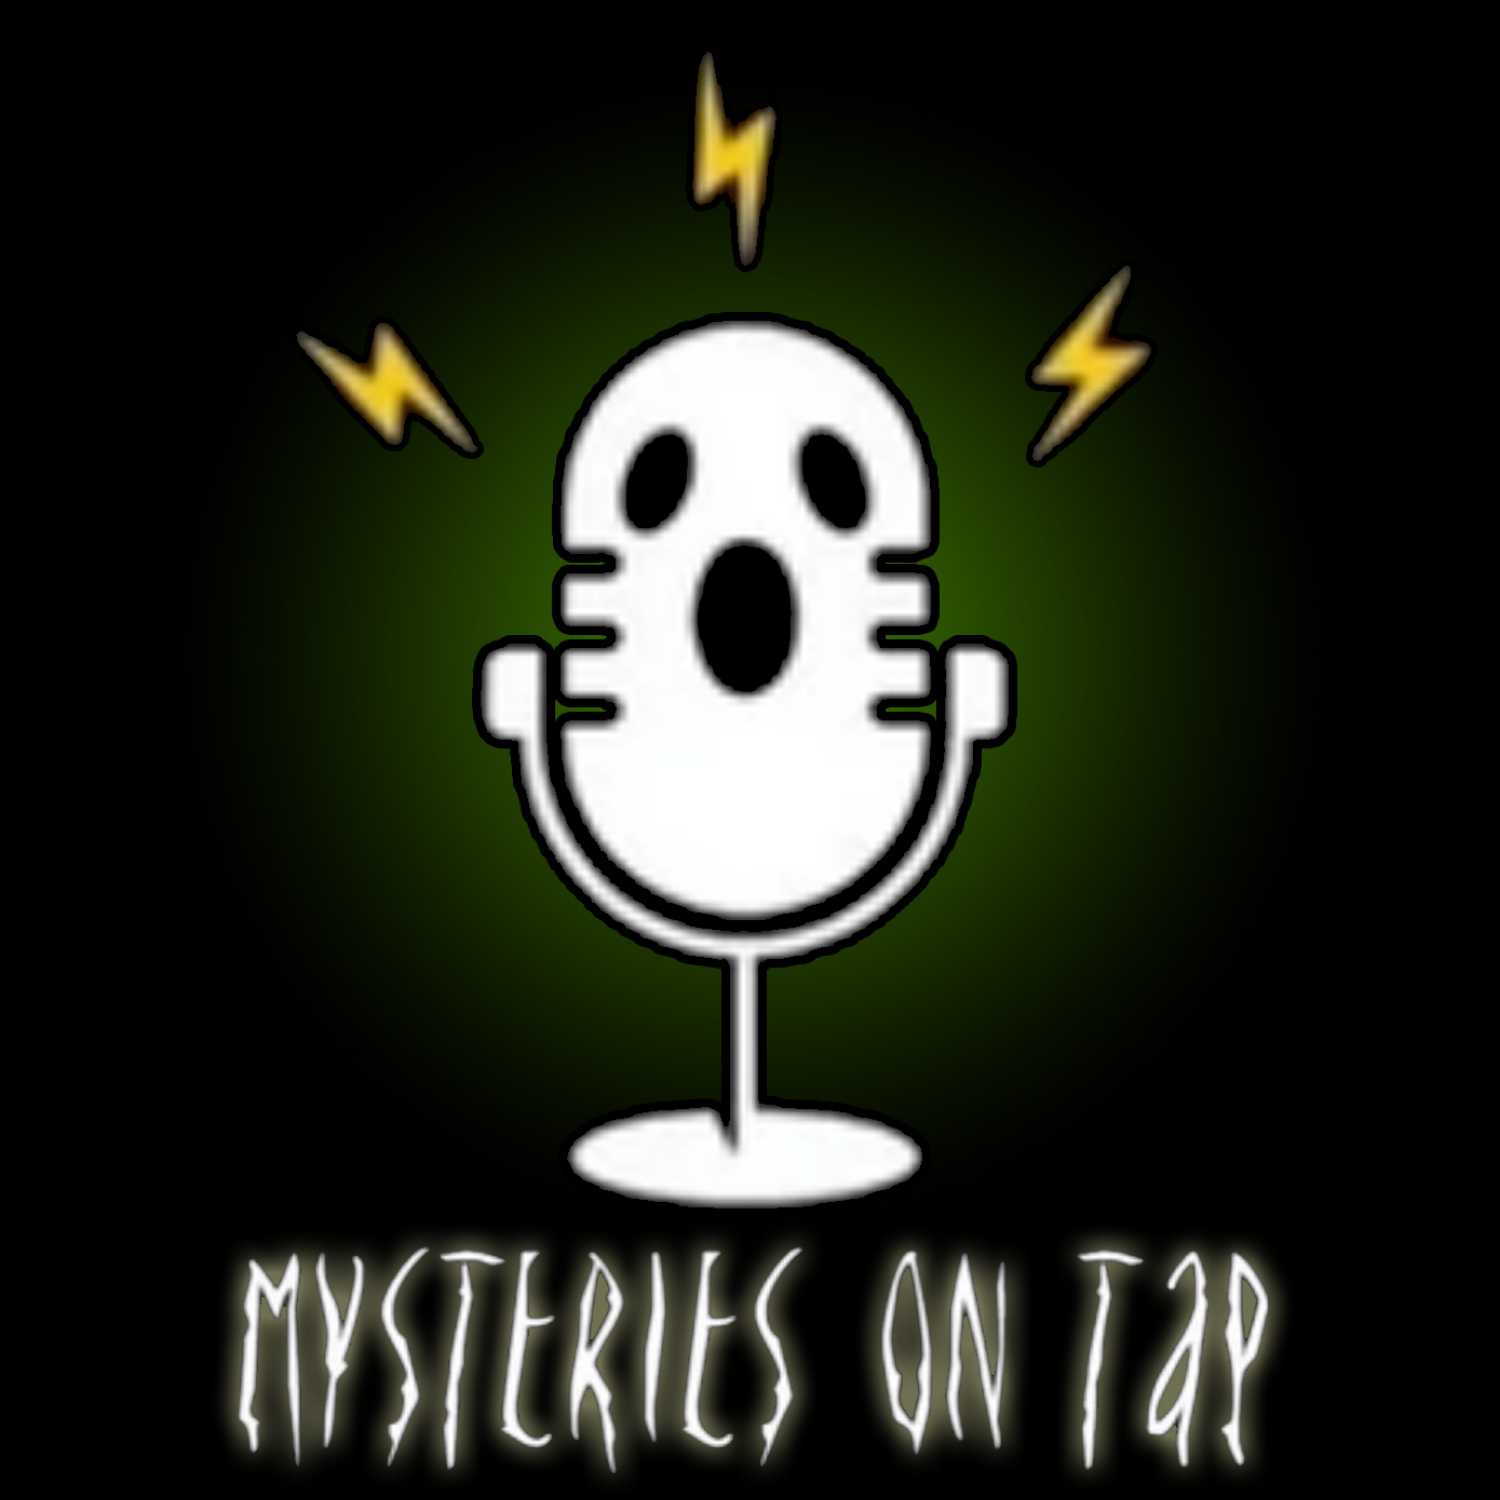 Mysteries on Tap